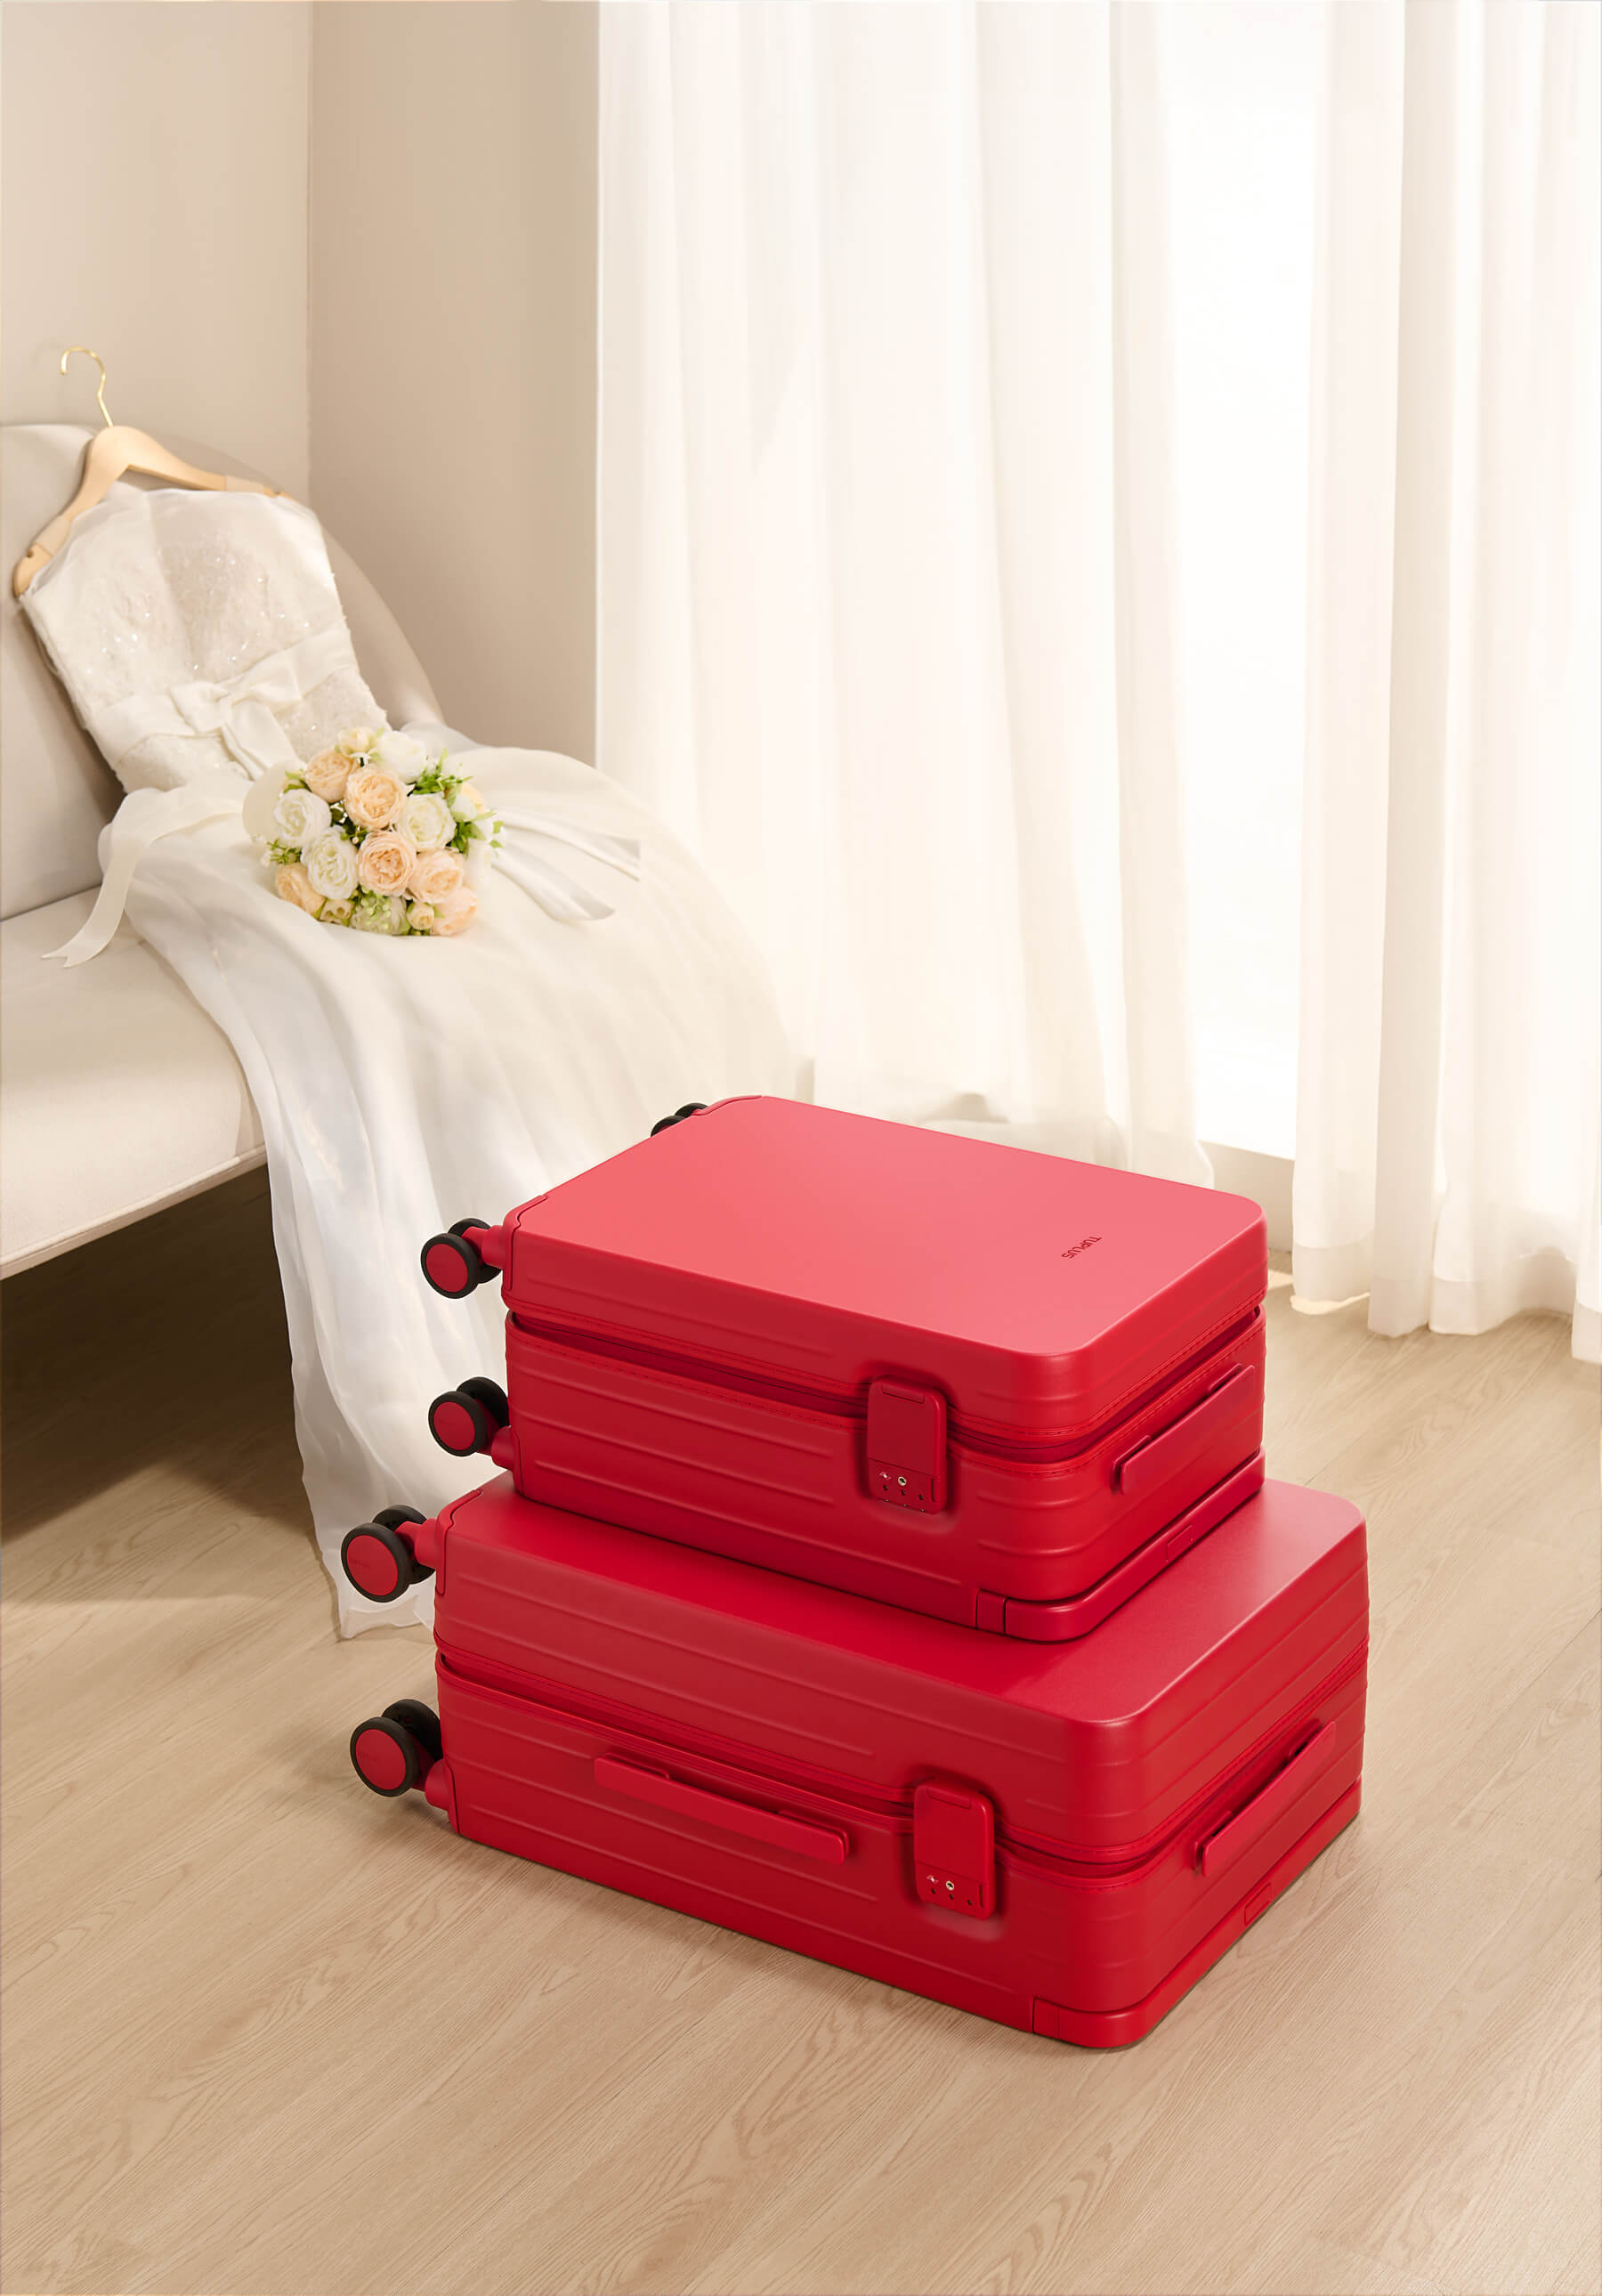 tuplus-impression-collection-suitcases-red-luggage-honeymoon.jpg